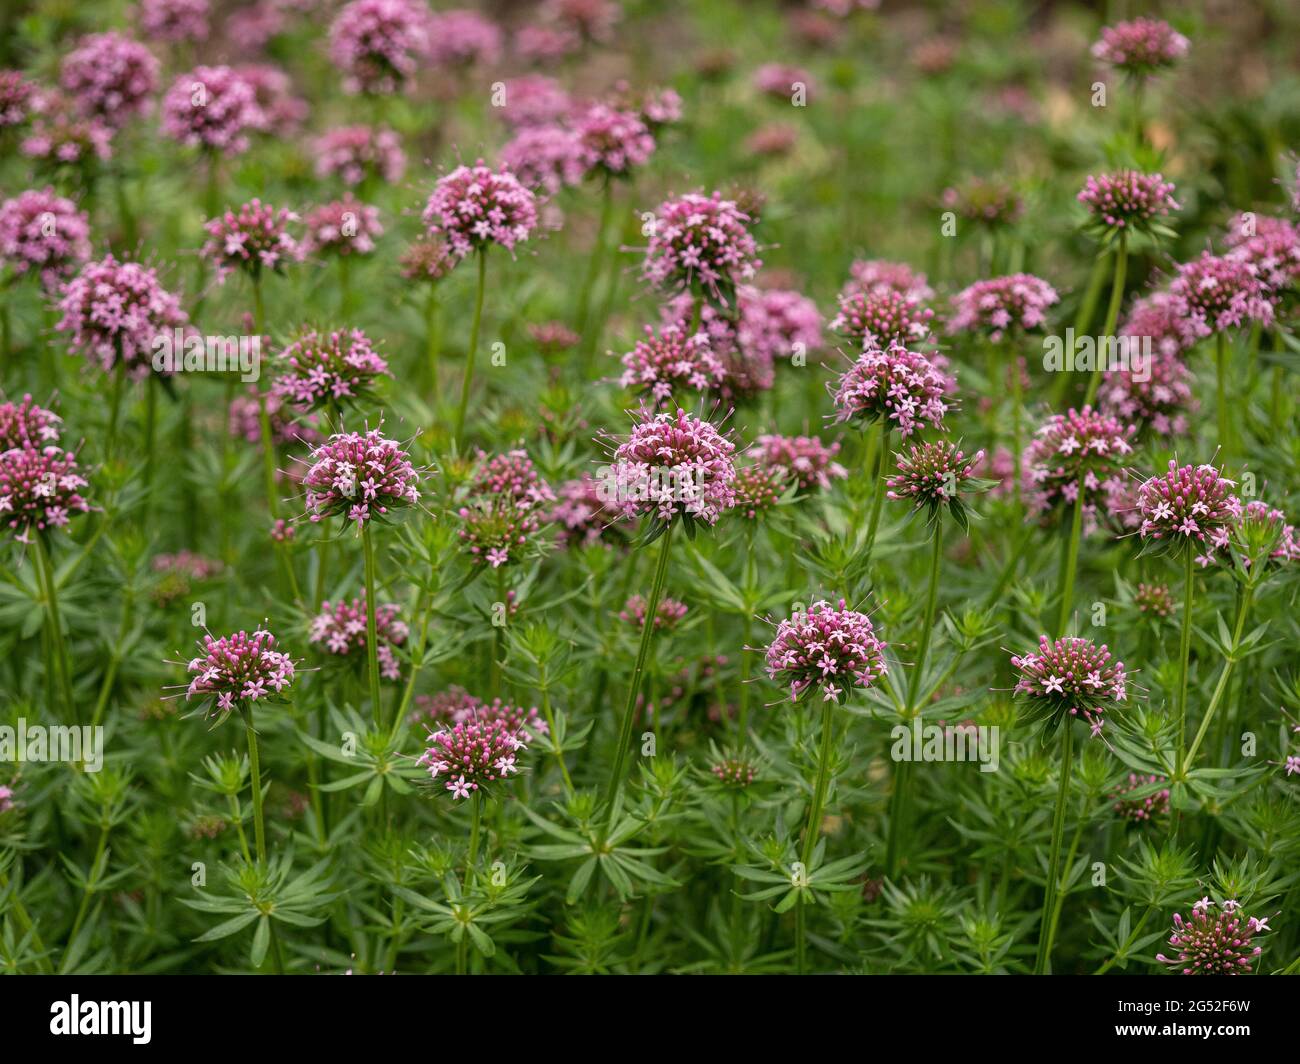 A clump of the groundcover plant Phuopsis stylosa covered with pink flowerheads Stock Photo